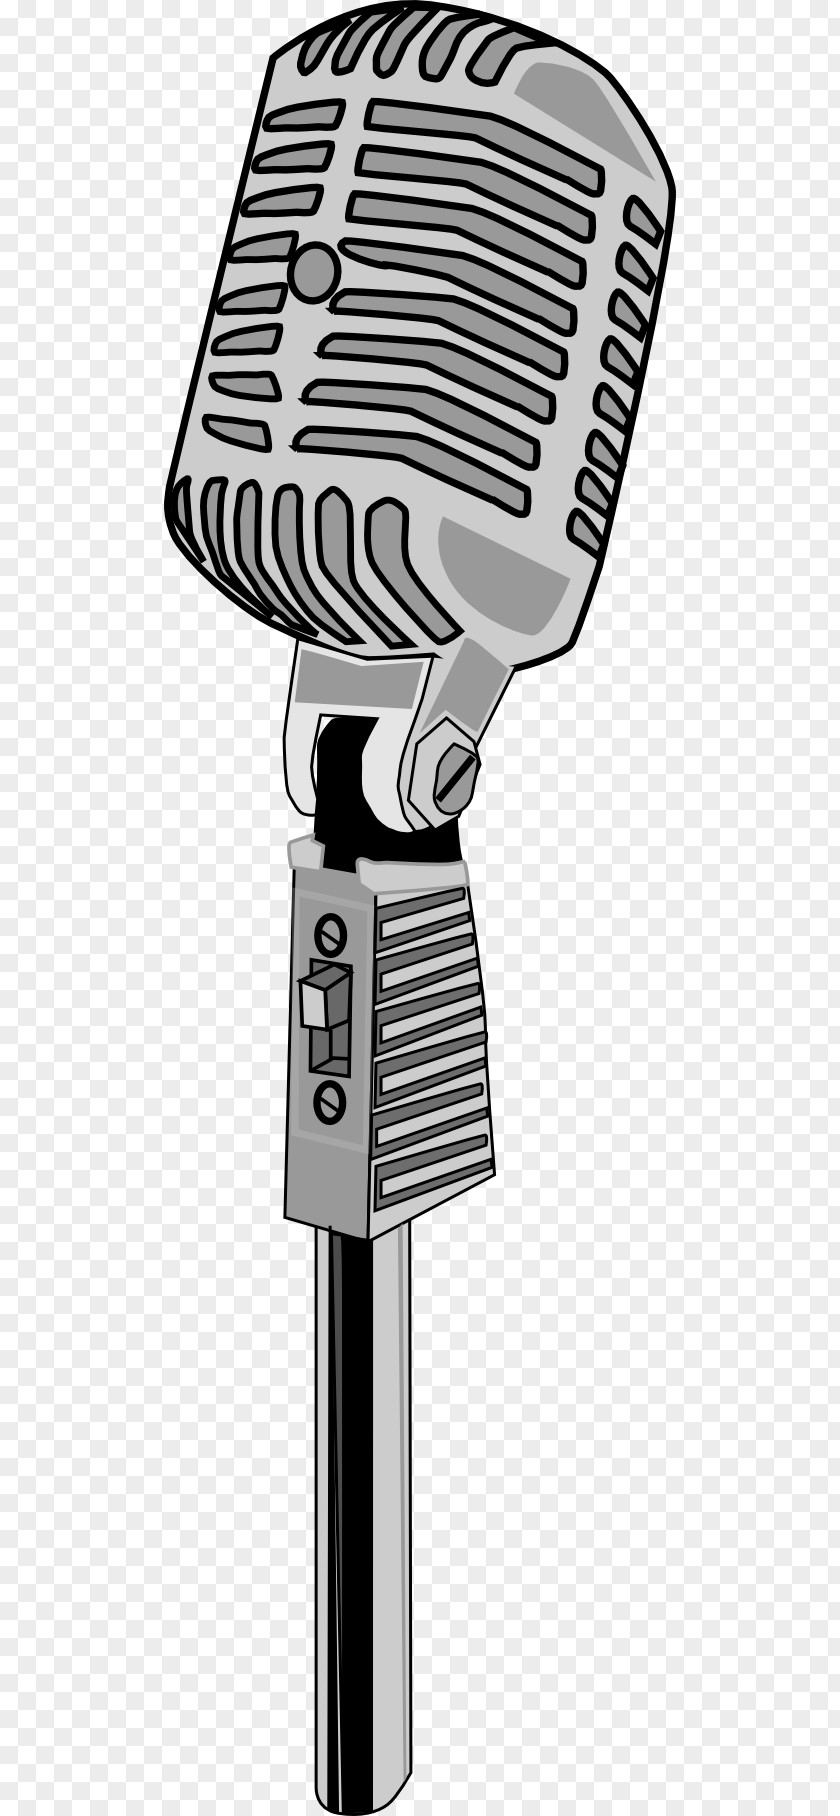 Microphone Images Clip Art PNG